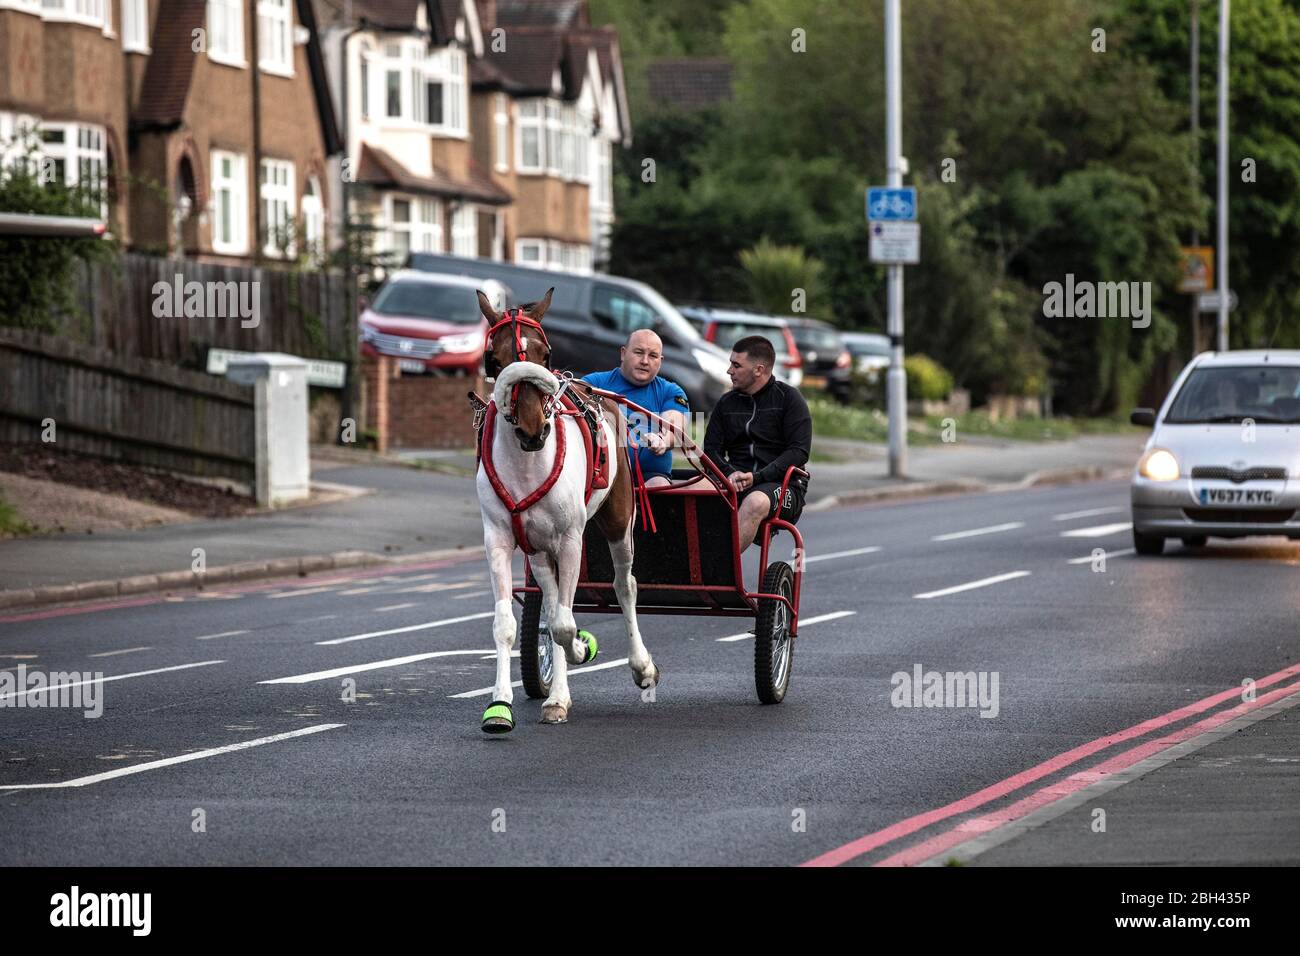 Horse Cart racers in Chessington, Surrey take a different route in the evening whilst training their horses on the public roads are empty during the Coronavirus lockdown across England, UK Surrey, England, UK 23rd April 2020 Credit: Jeff Gilbert/Alamy Live News Stock Photo